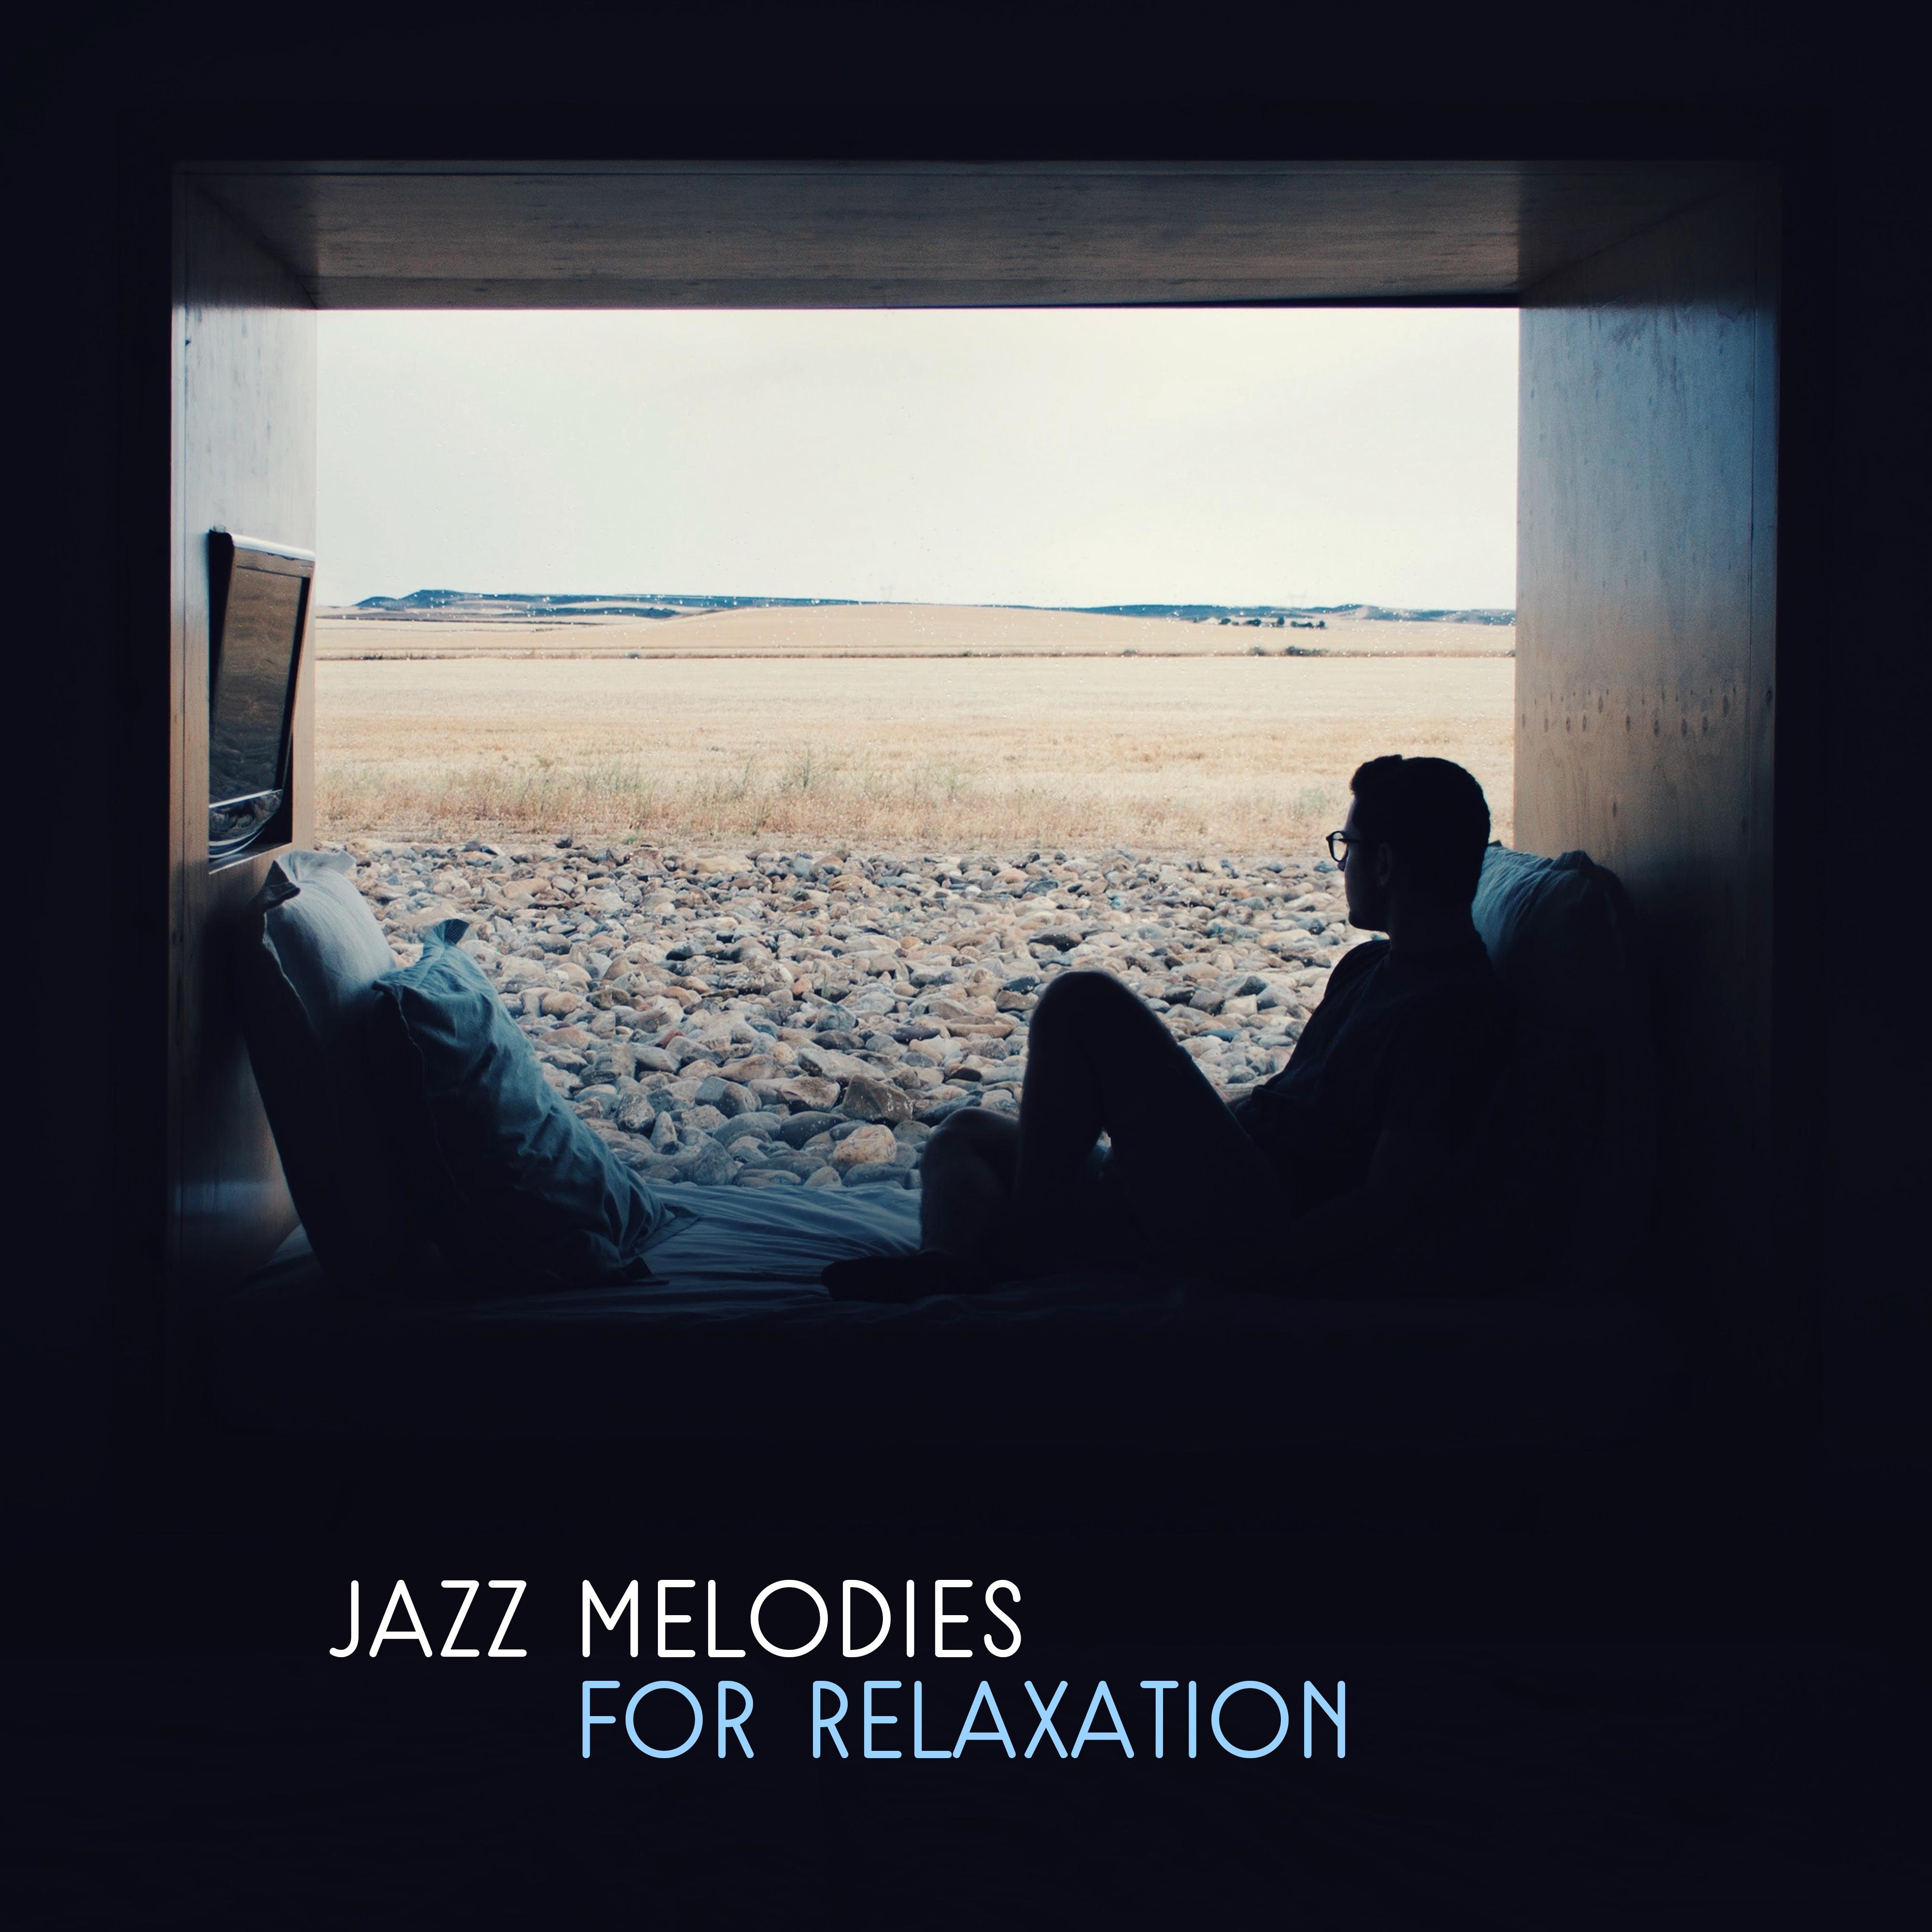 Jazz Melodies for Relaxation  Smooth Sounds for Relaxation, Jazz Memories Music, Soft Instrumental Sounds